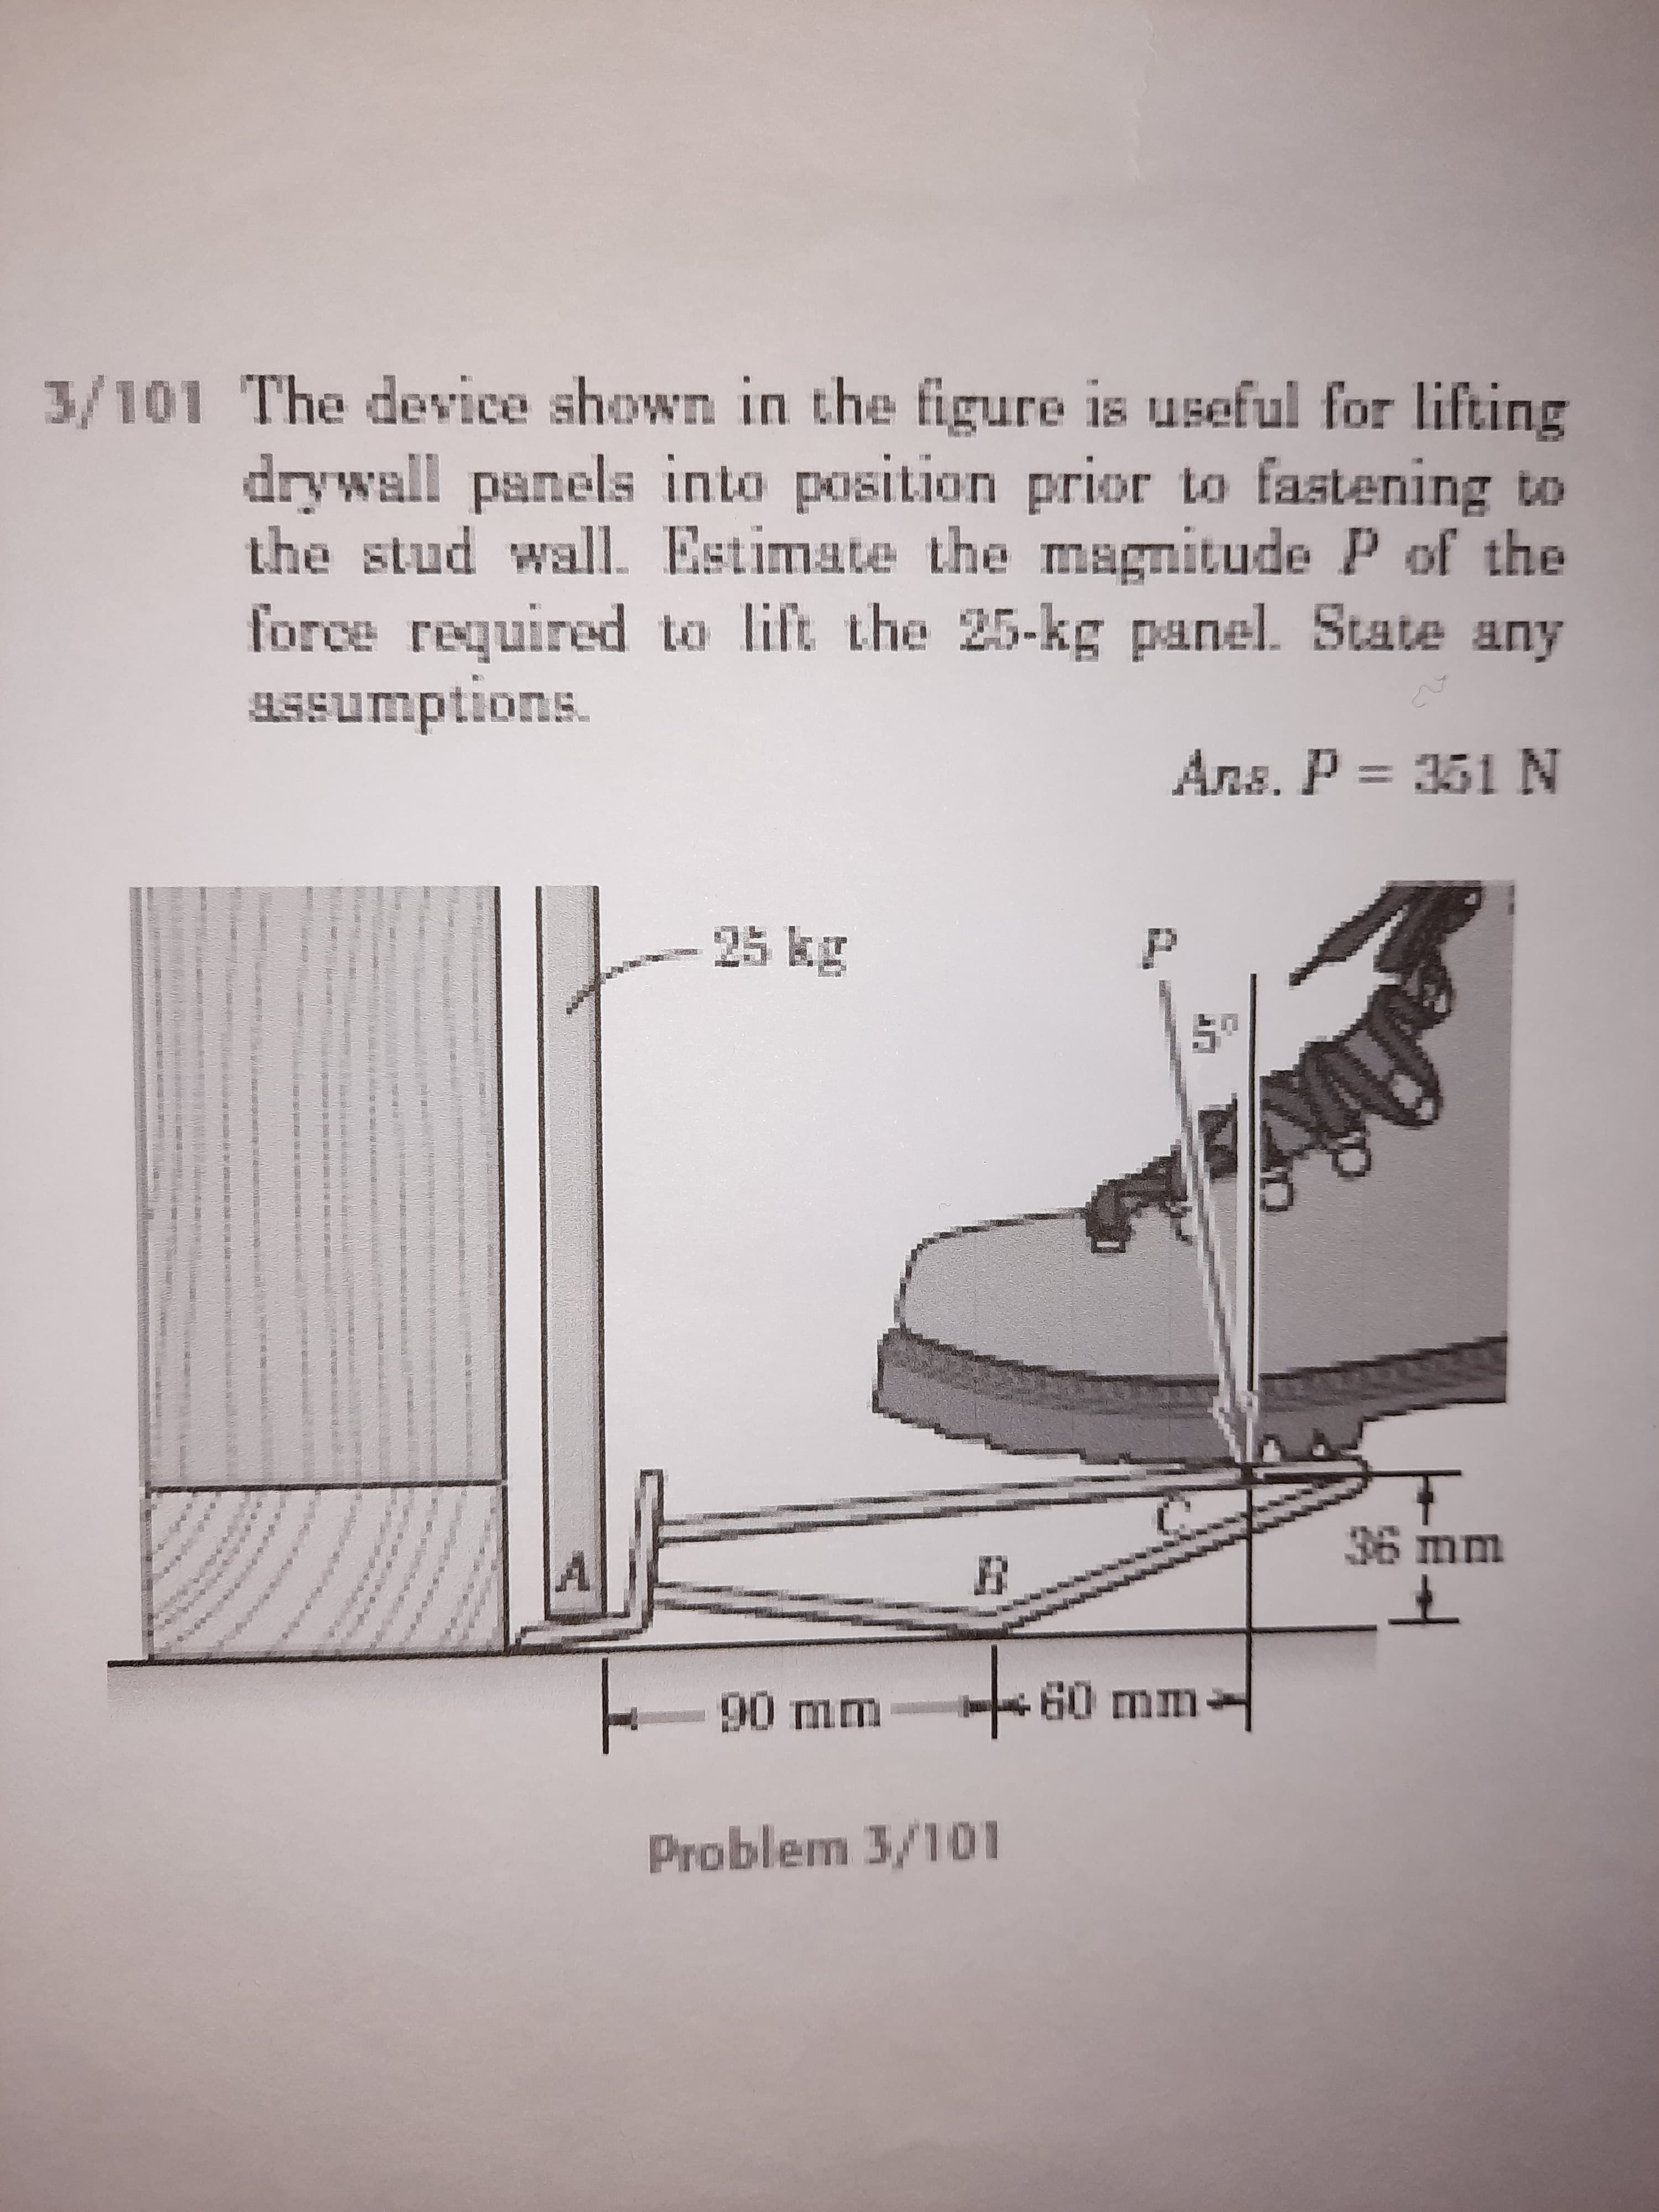 The device shown in the figure is useful for lifting
drywall panels into position prior to fastening to
the stud wall. Estimate the magnitude P of the
force required to lift the 25-kg panel. State any
aSsumptions.
